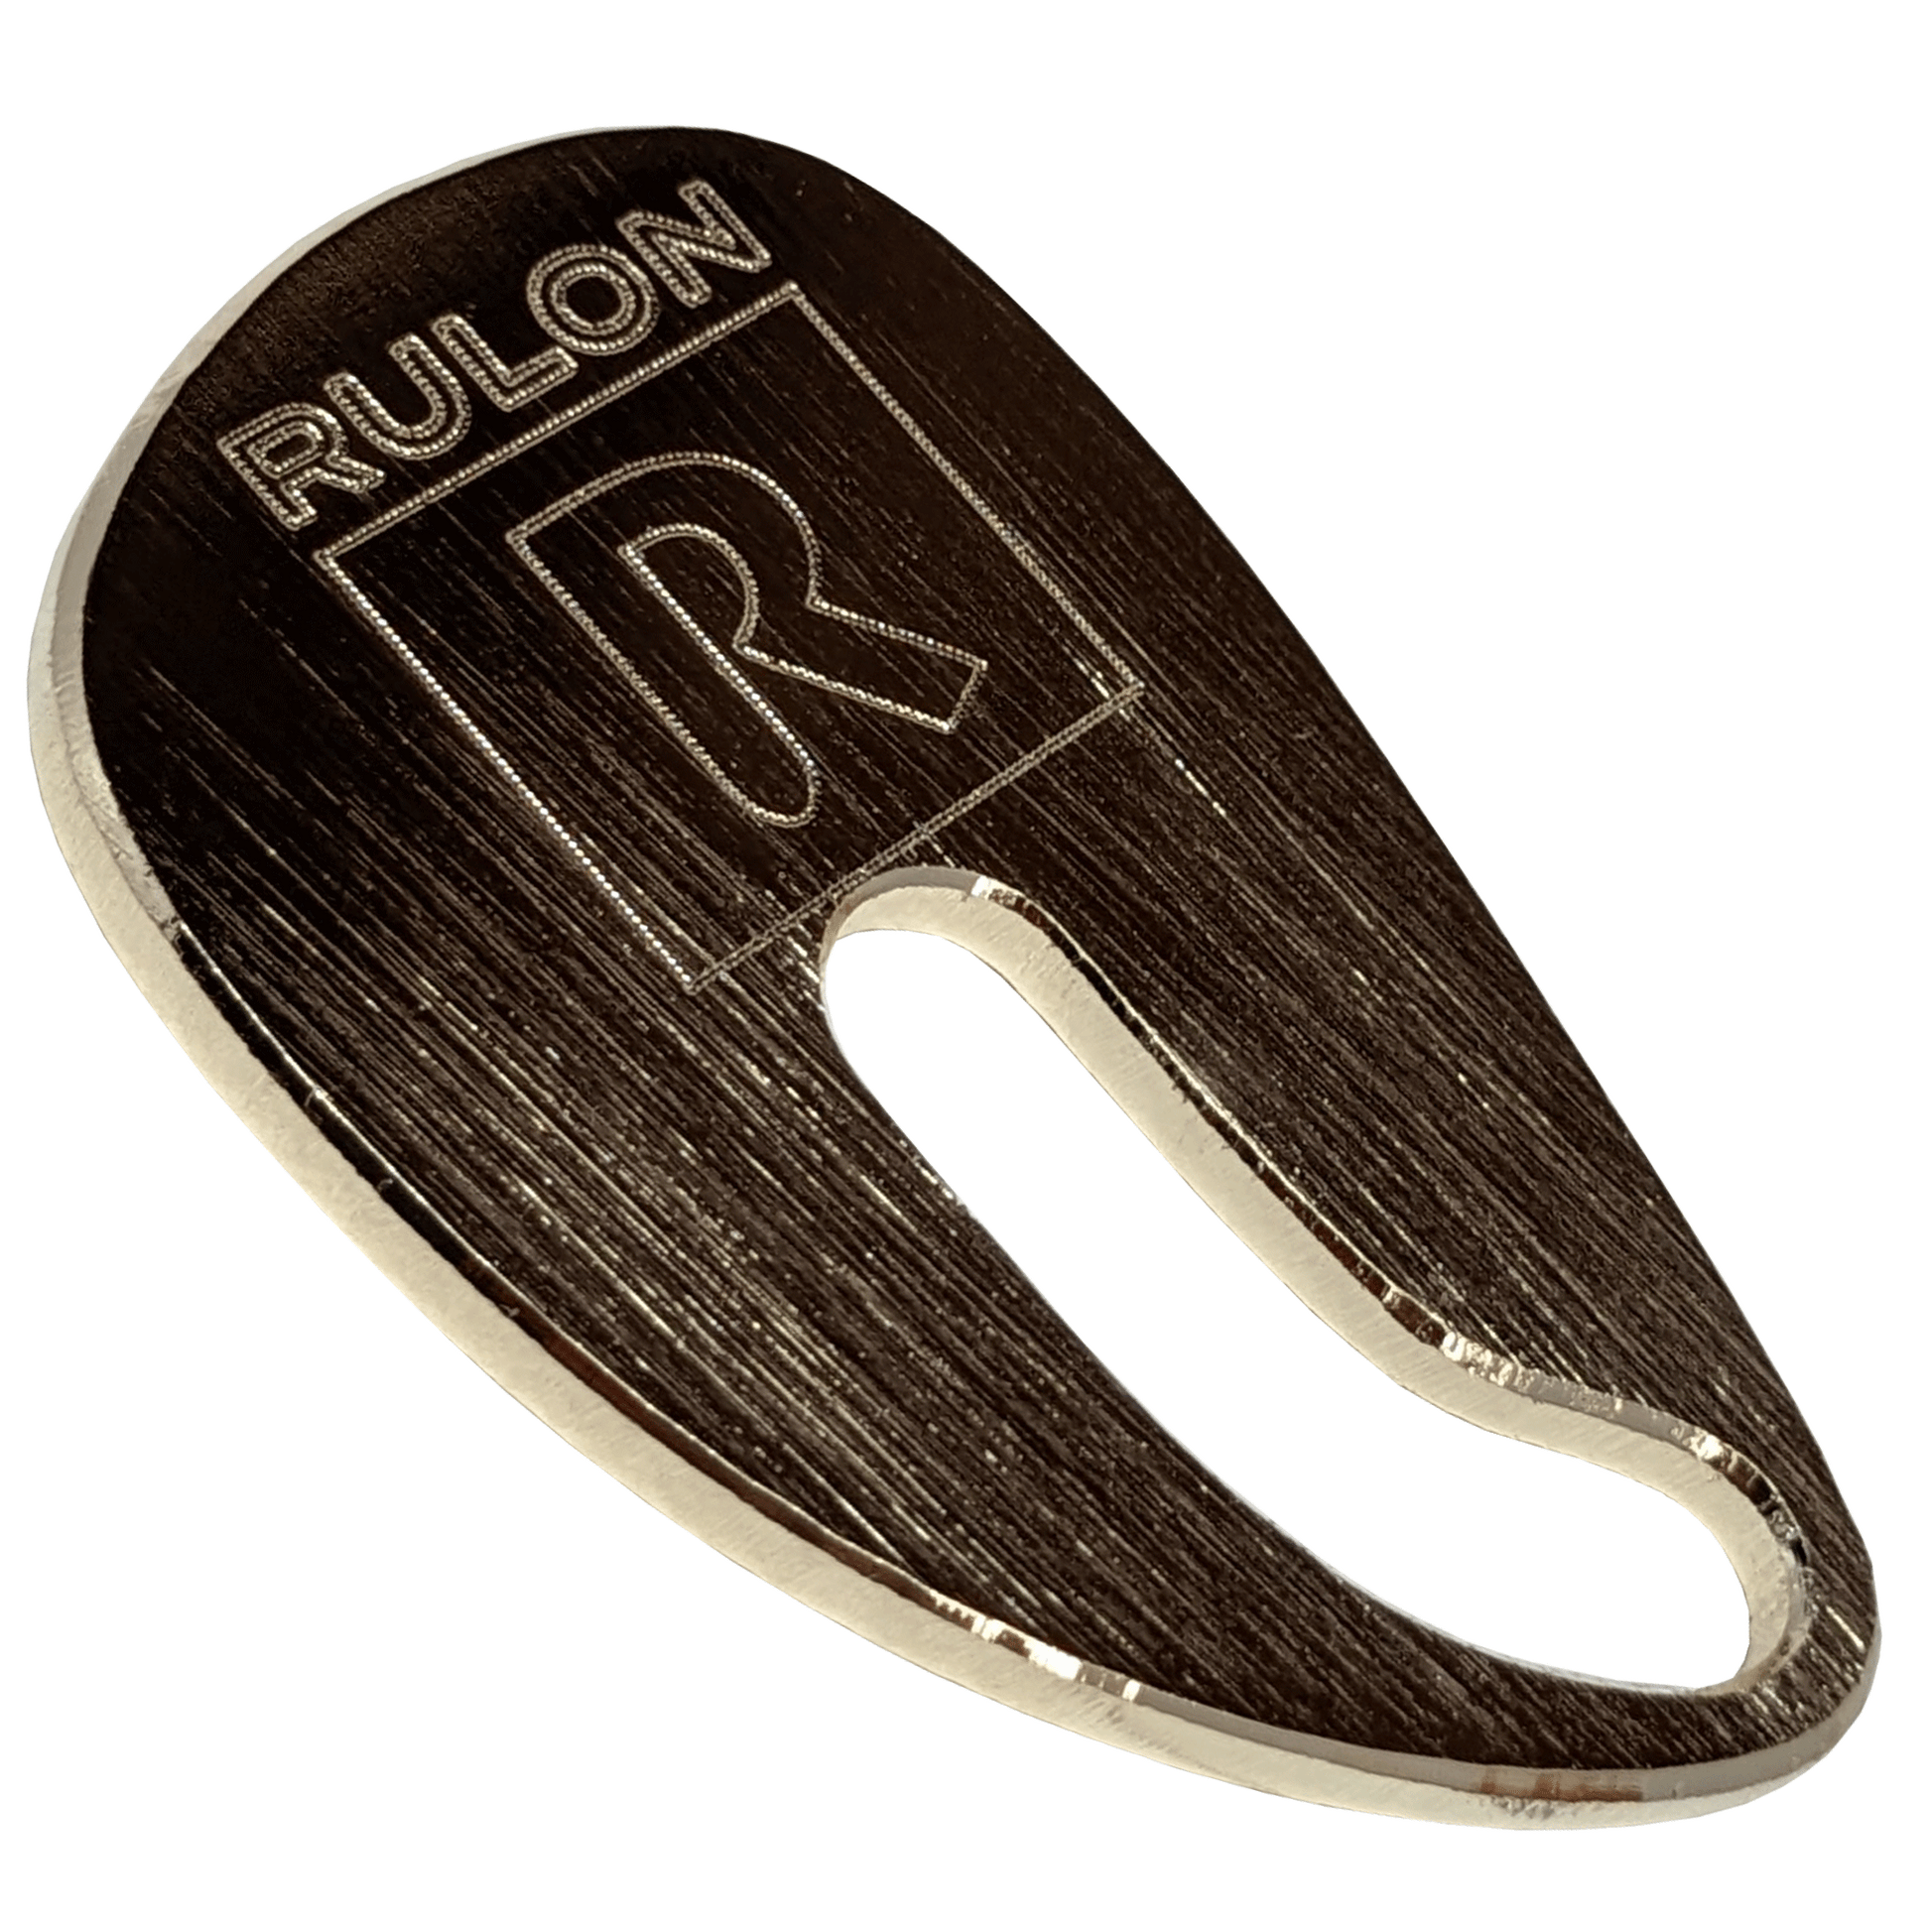 The RULON Gold plated saxophone thumb rest replaces the right hand thumb hook with an adjustable plate to fit small or large hands. It is a great ergonomic device to prevent hand tension and wrist pain while playing saxophone.